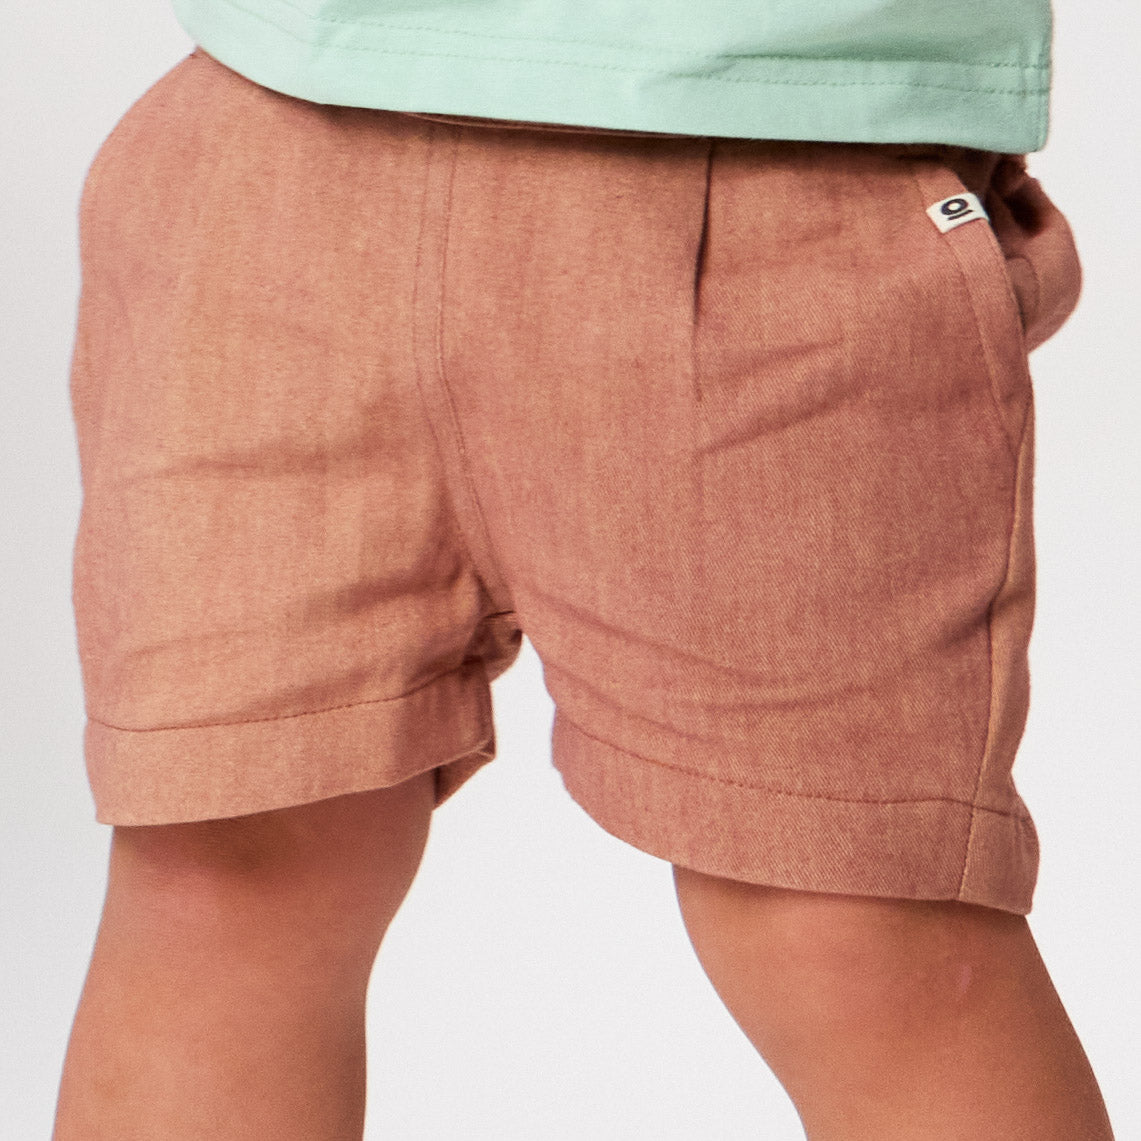 "It's all G" shorts in tan - 100% organic cotton, extendable waistband